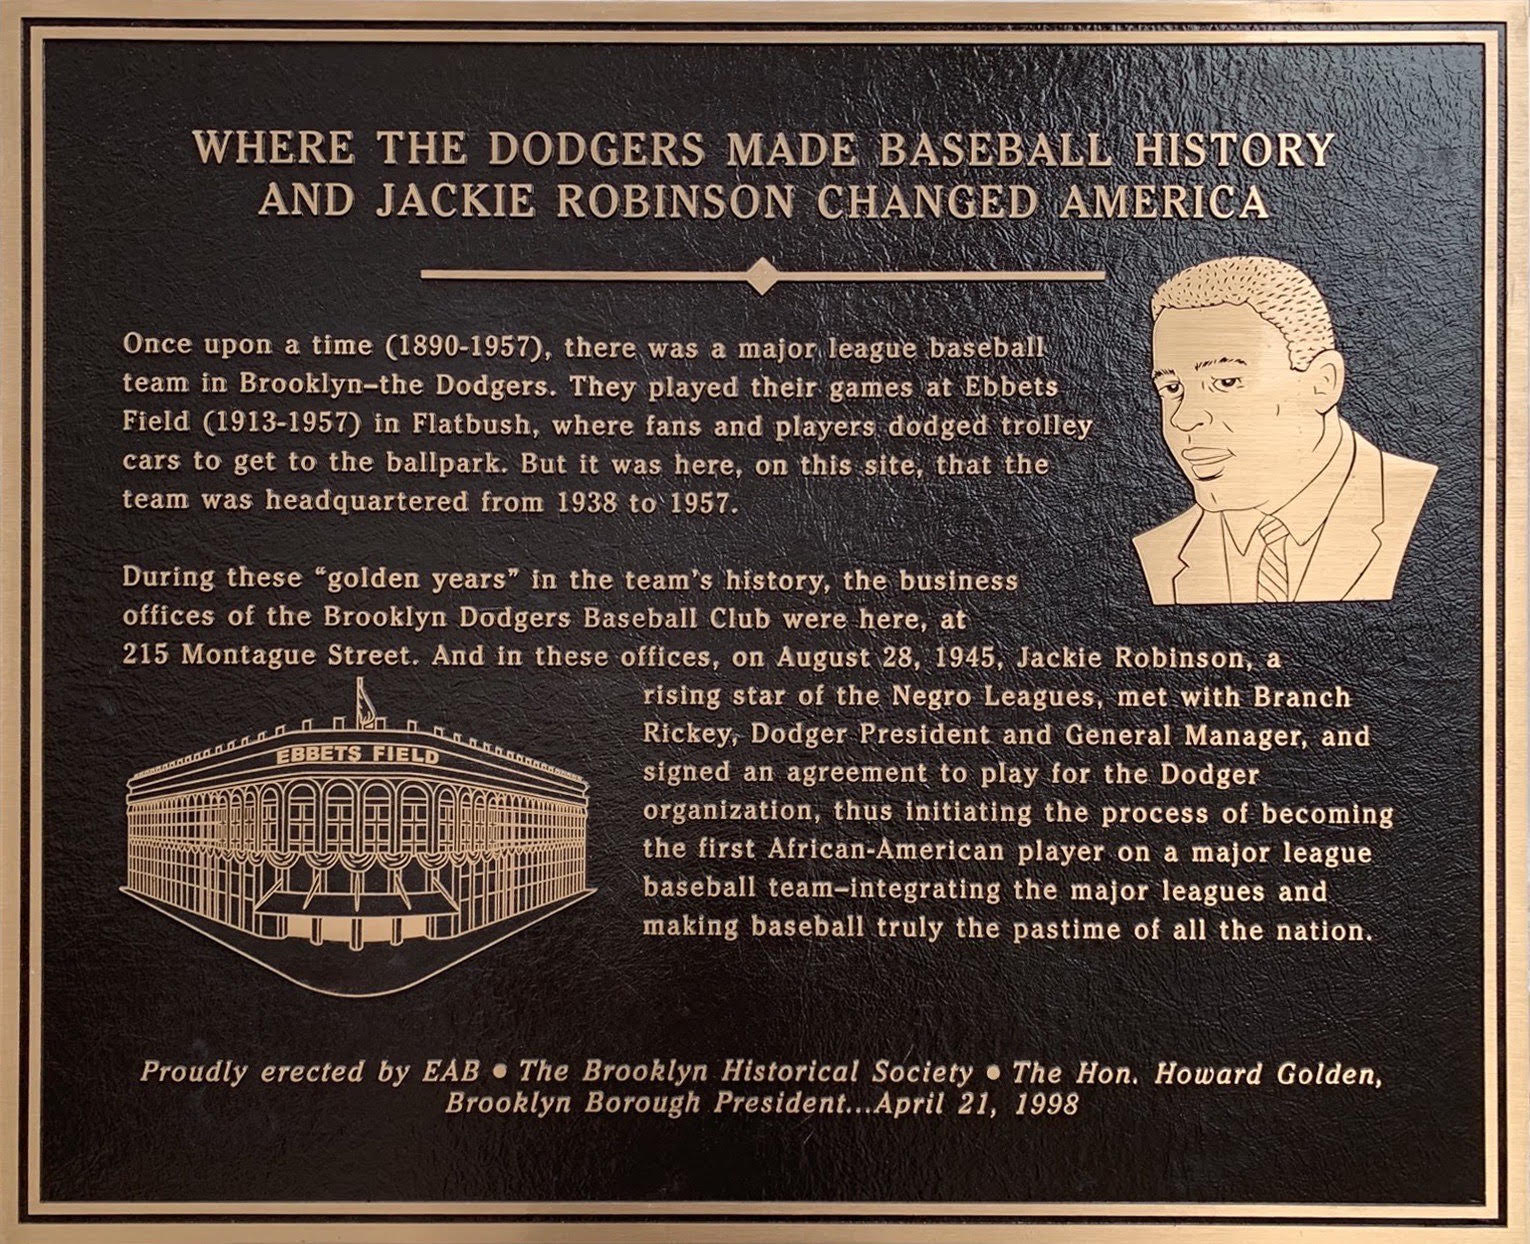 This historical marker lives at 215 Montague Street in Brooklyn, where Jackie Robinson and Branch Rickey met for the first time at the Dodgers offices on August 28, 1945. (COURTESY OF JAY JAFFE)